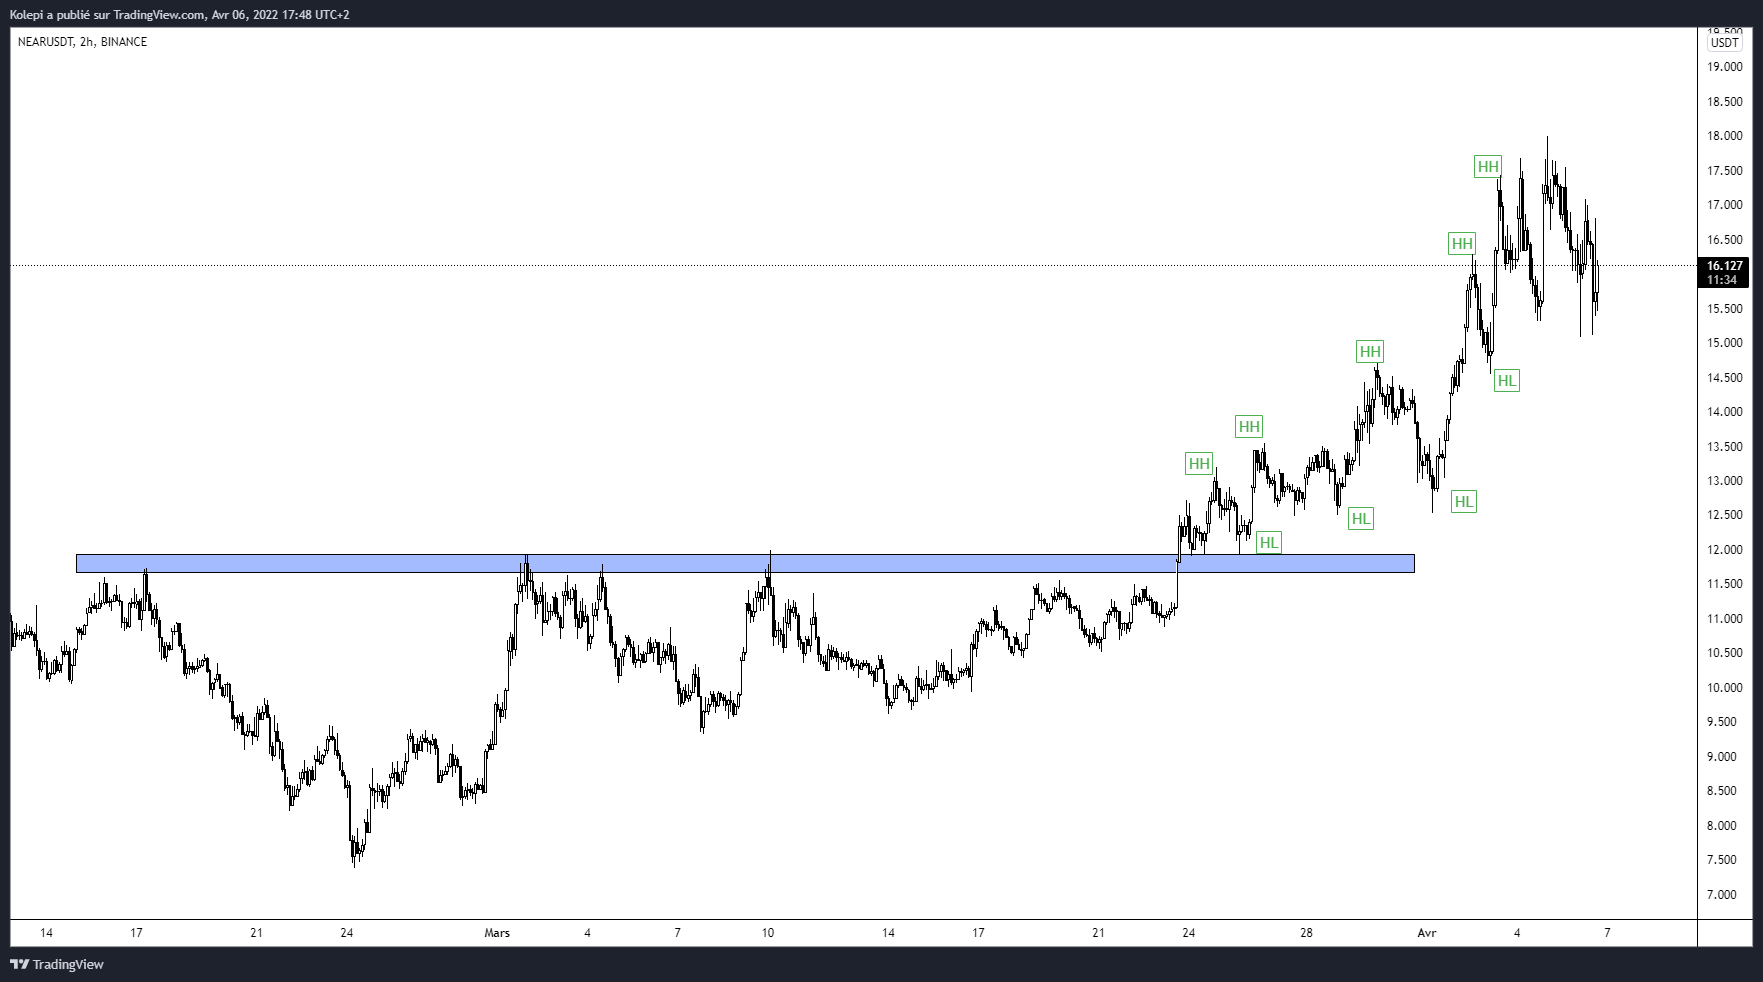 NEAR in daily, well established trend